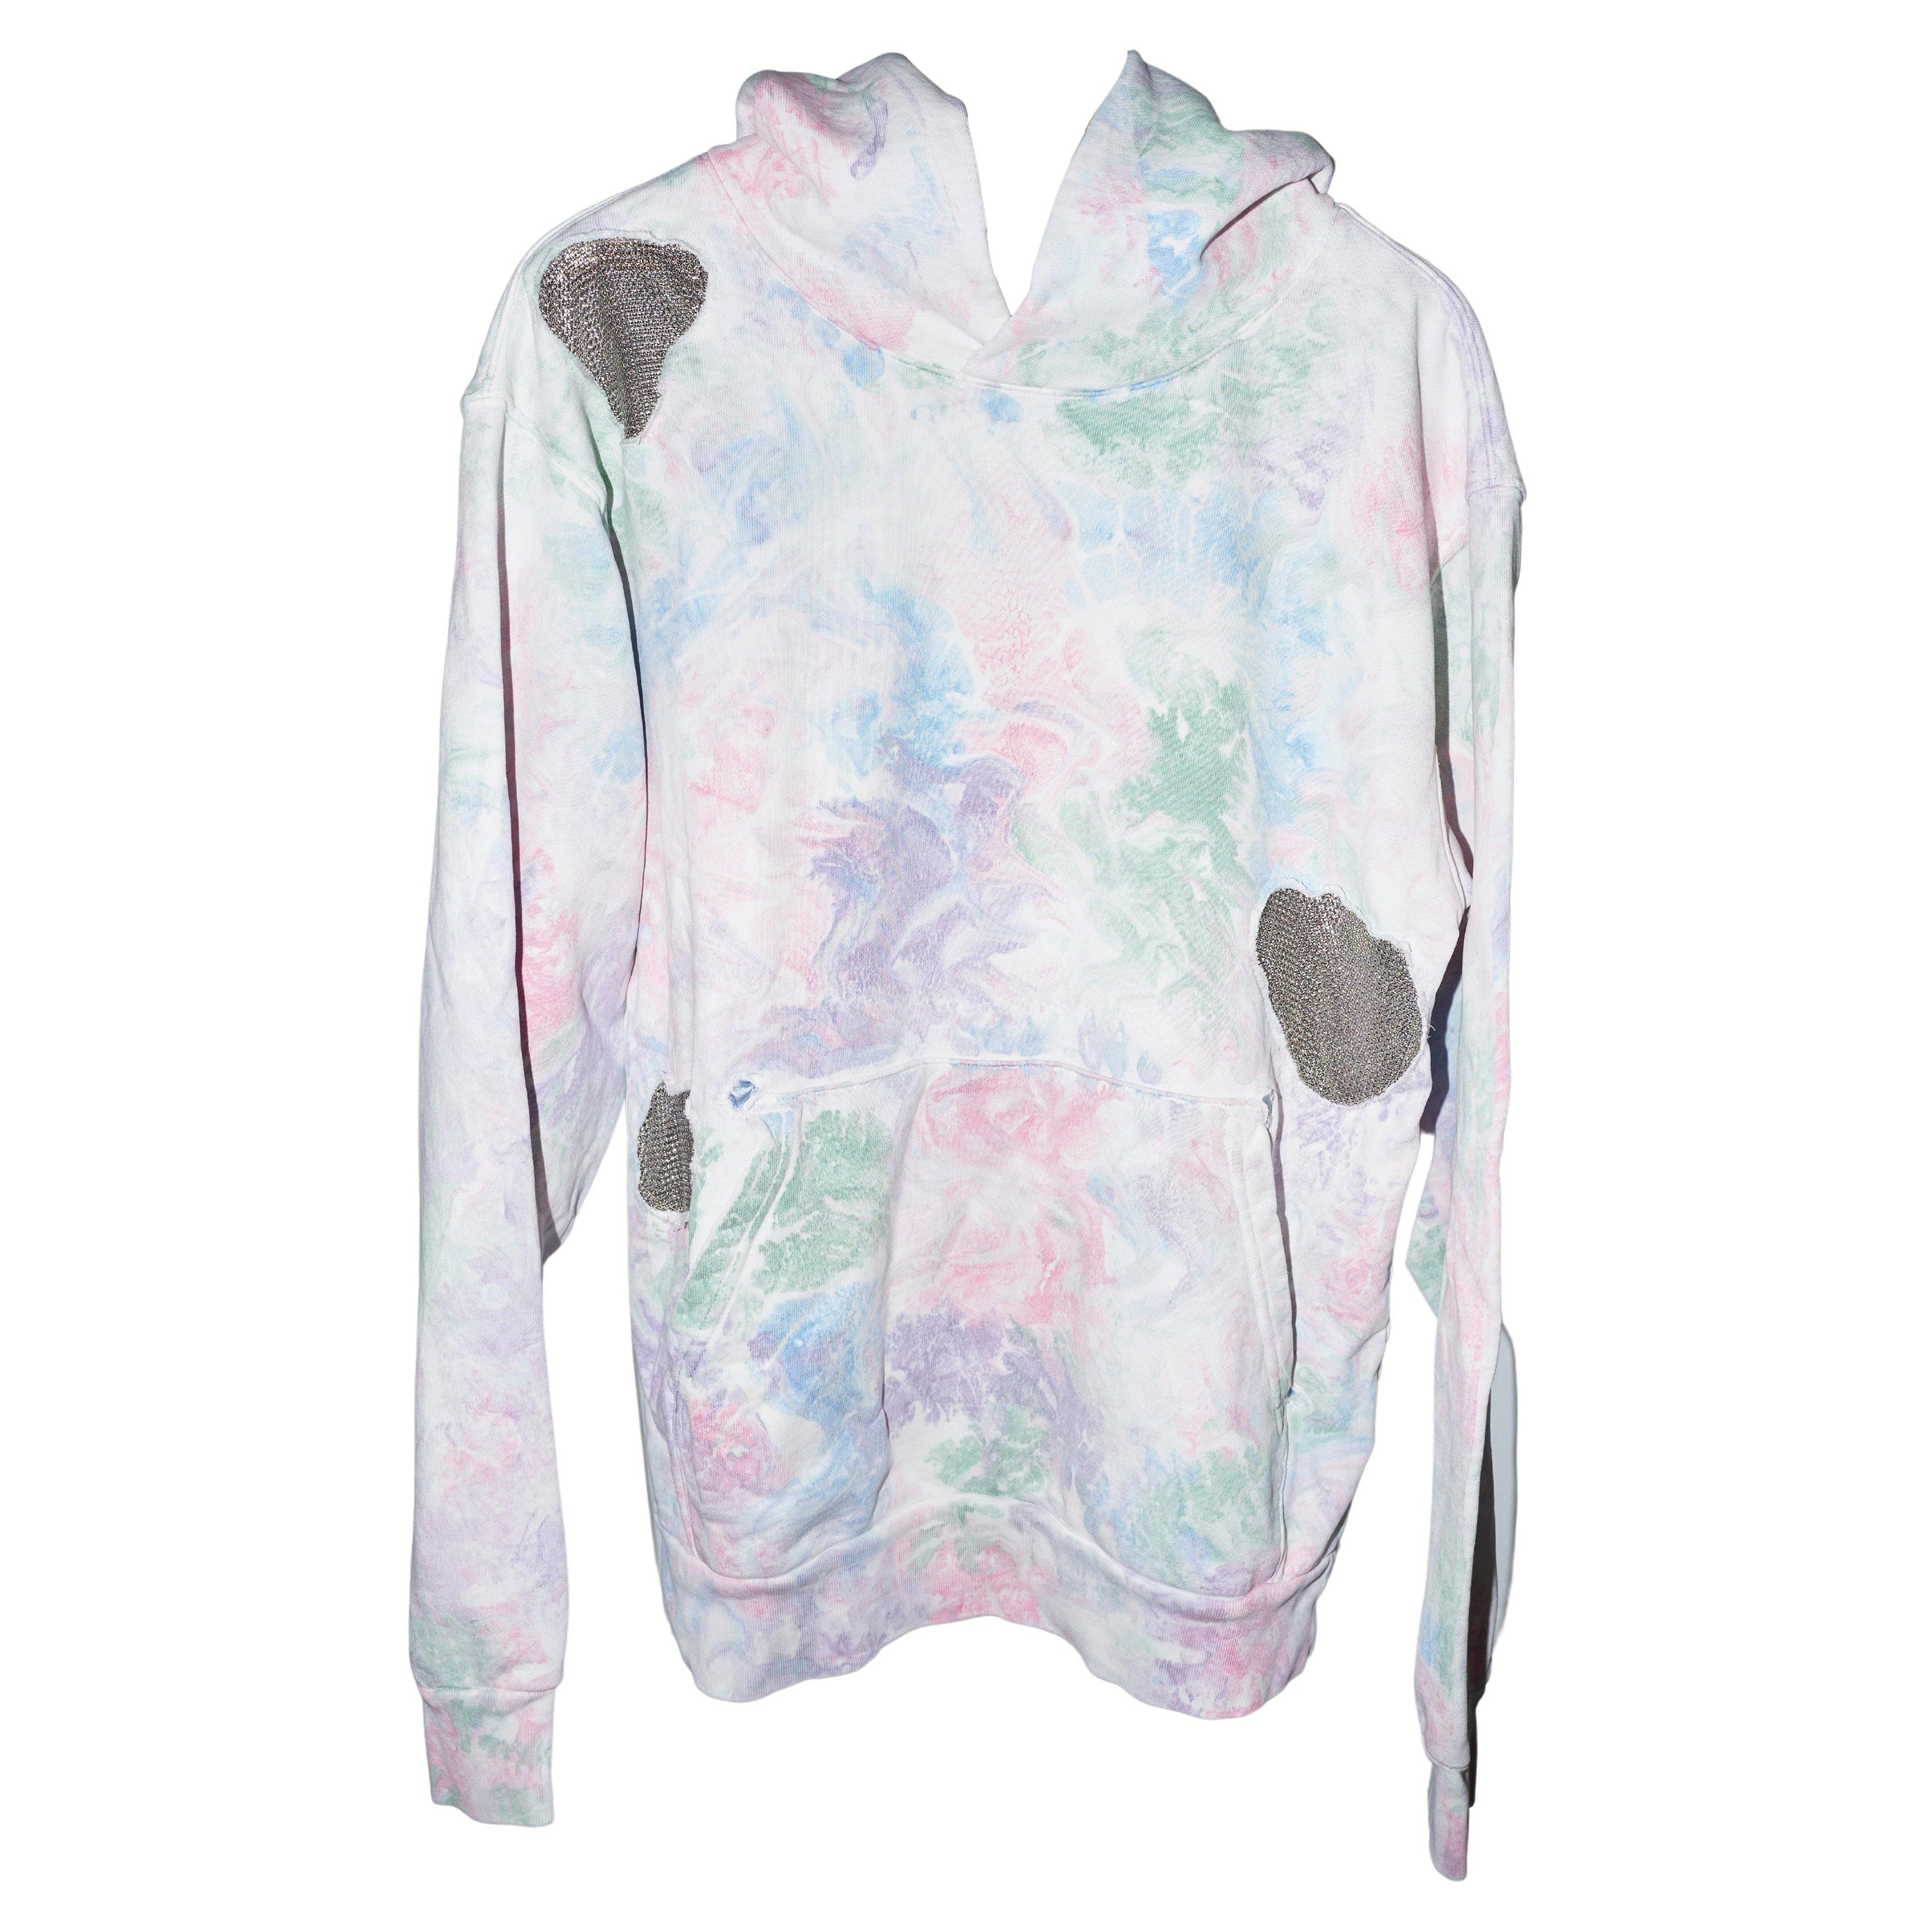 Hoodie Pastel Marble Cotton Embellished Chain Patchwork J Dauphin